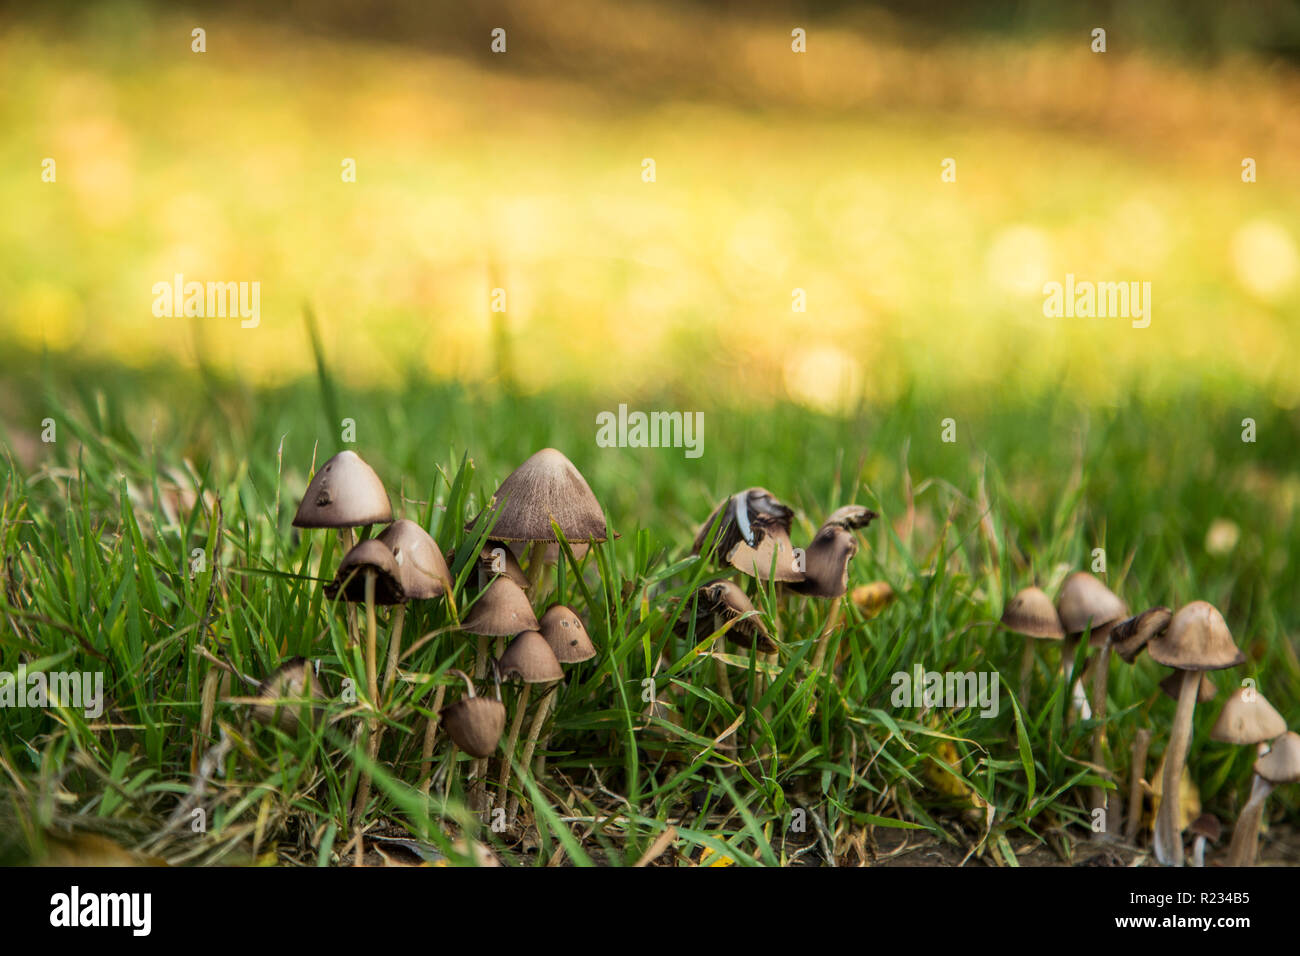 Small Brown Mushrooms Growing In The Garden Amongst The Grass On A